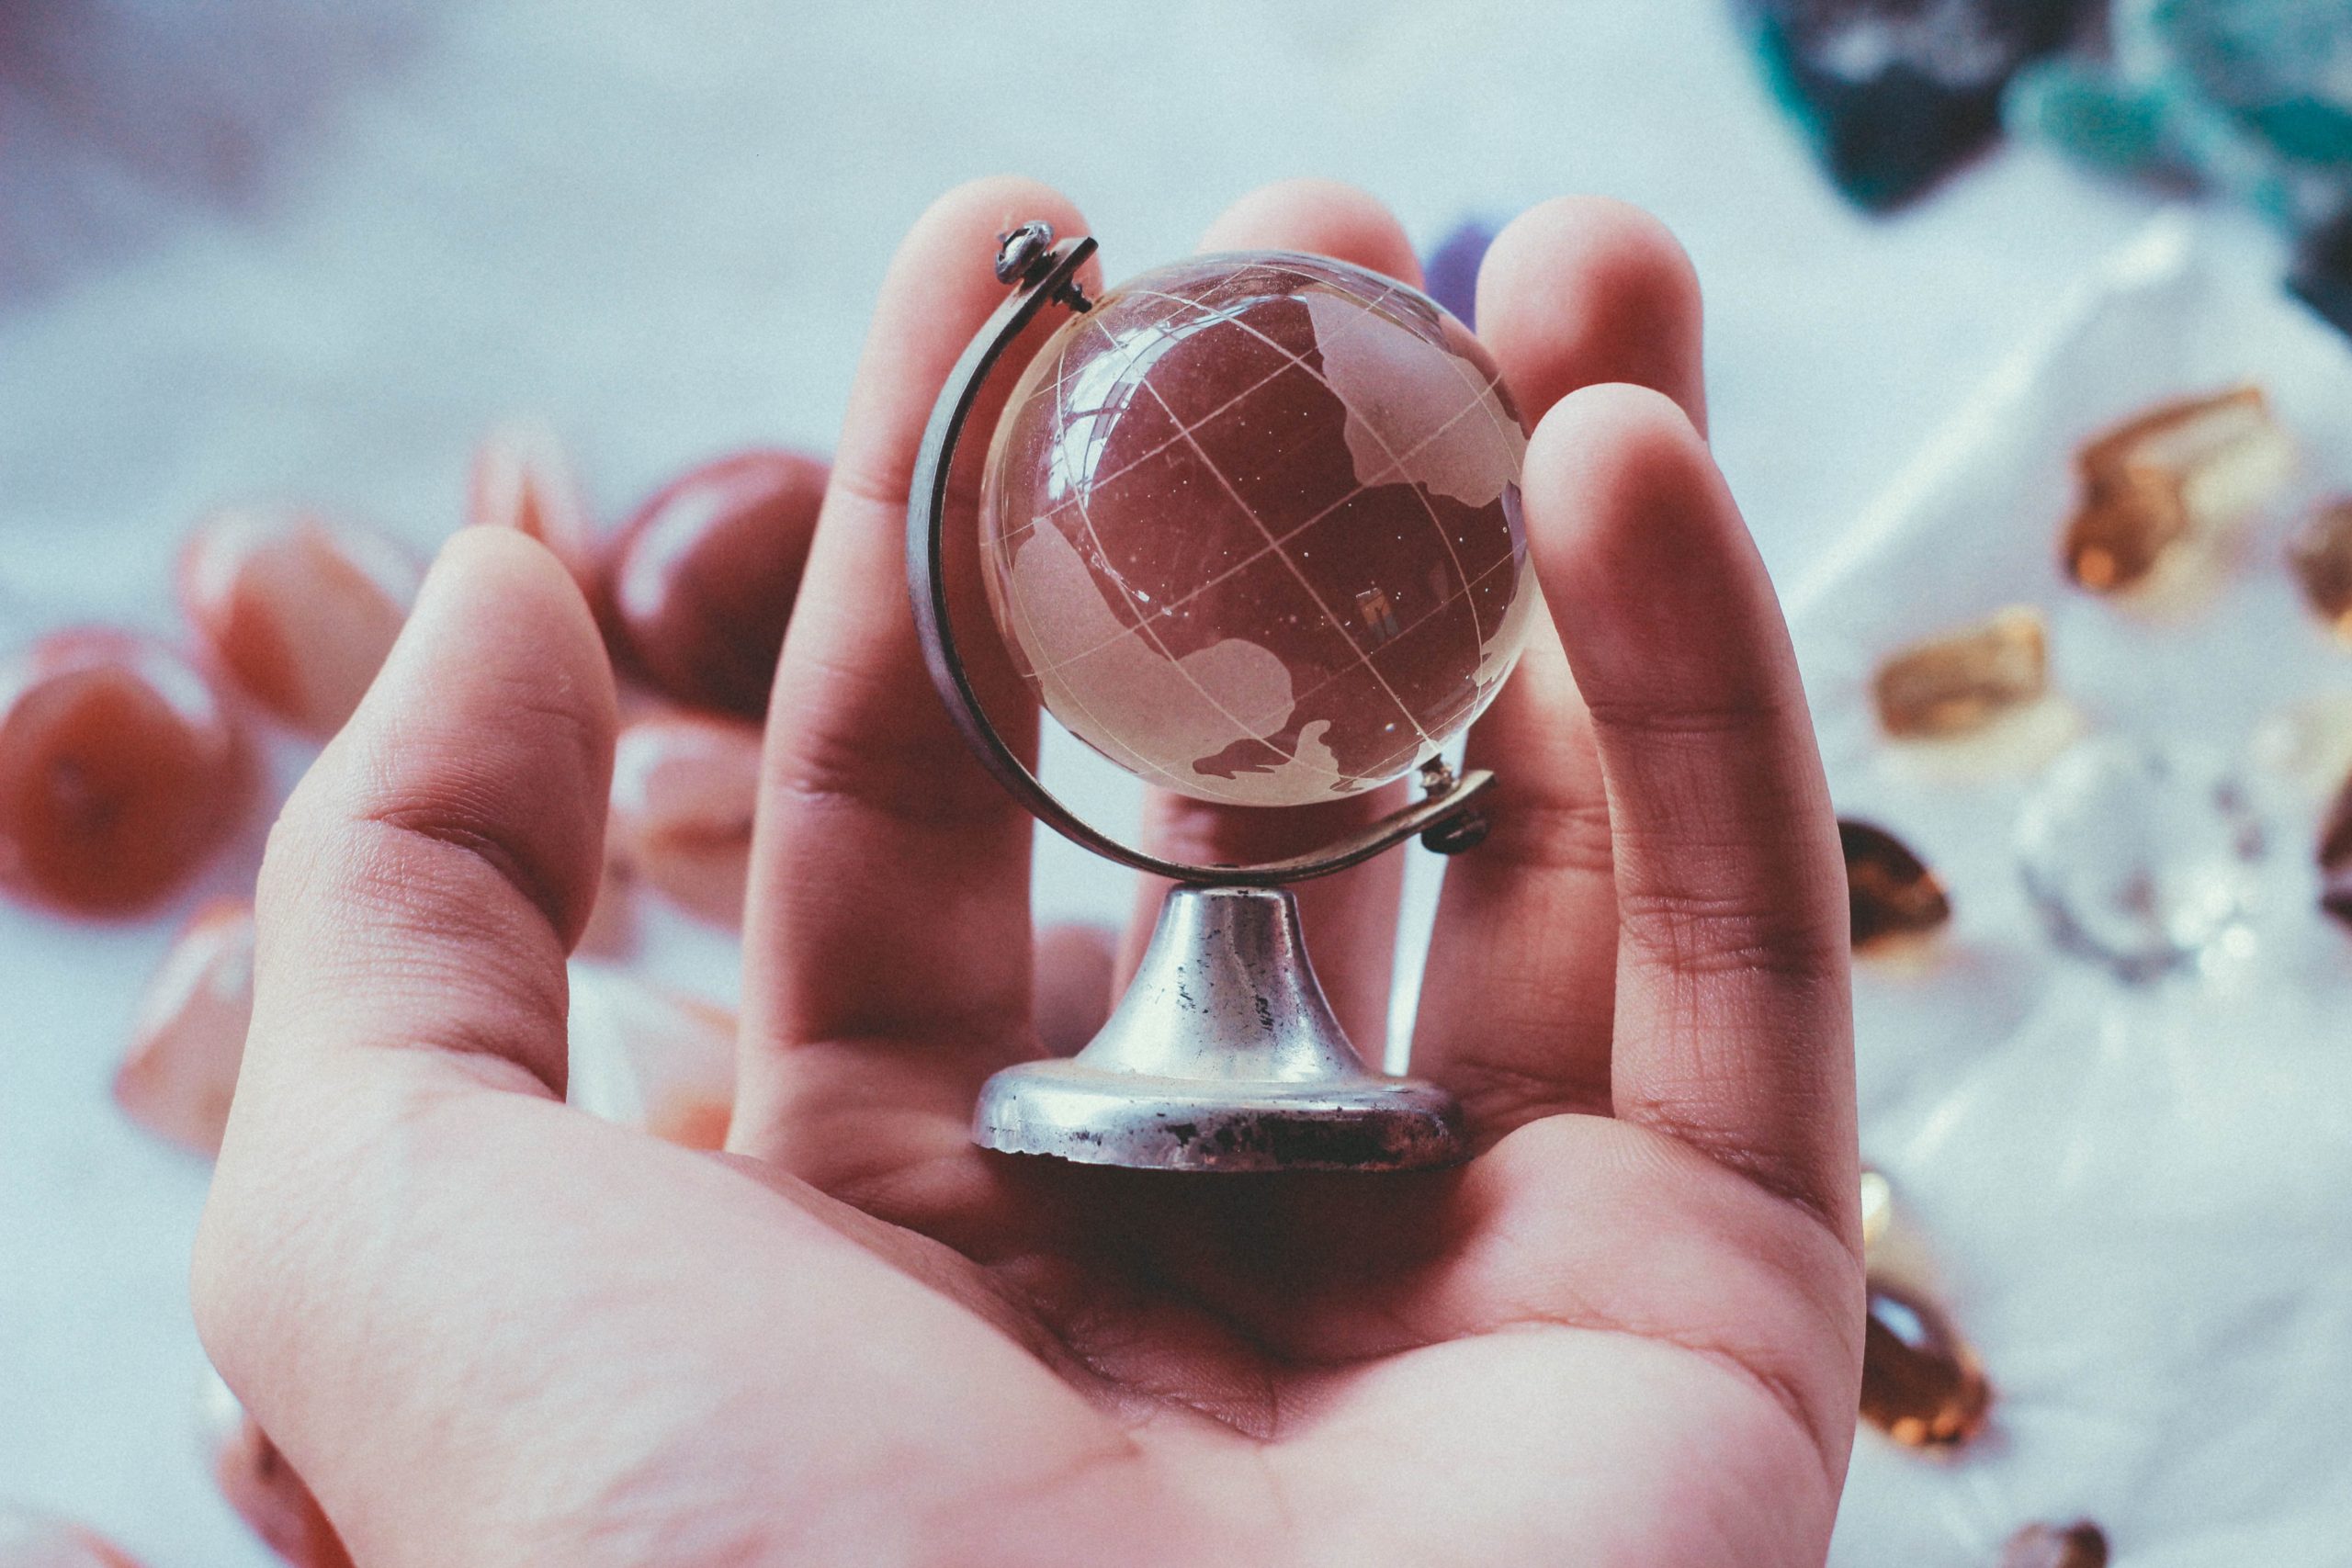 a hand holding a small globe to represent relocating in big 4 accounting firms